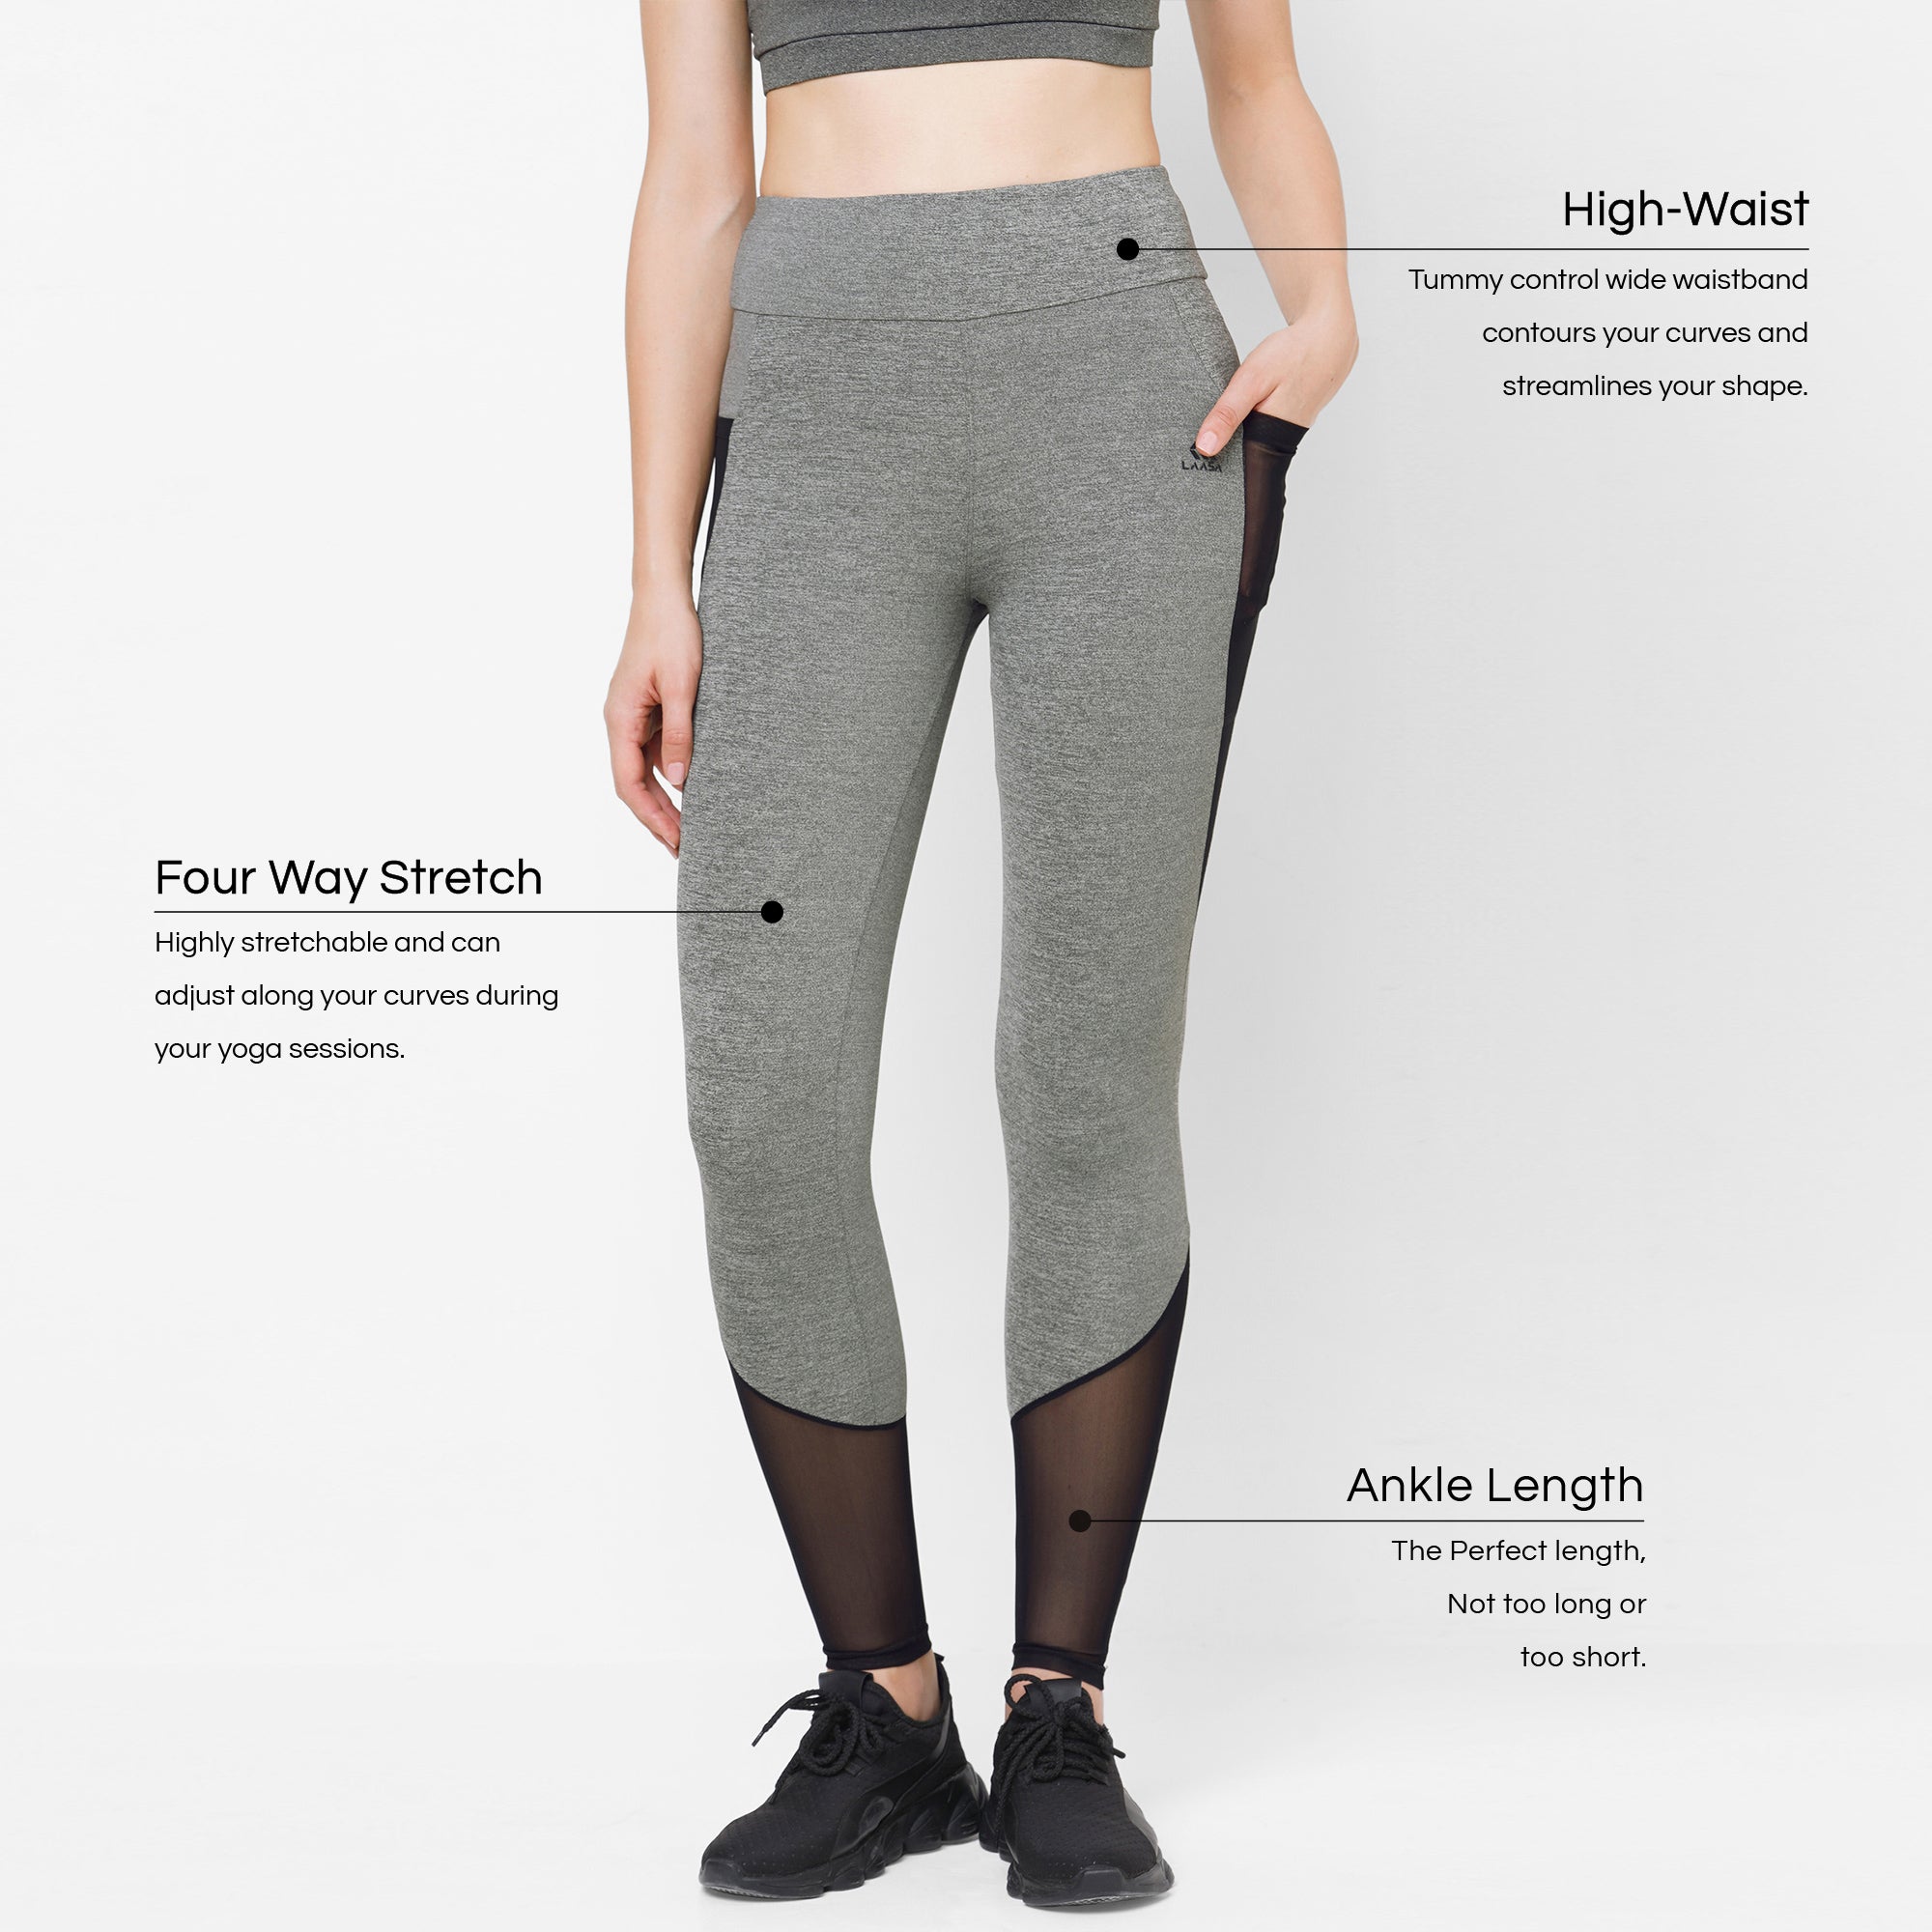 Why do ladies wear leggings even though they are so tight fitting and shape  revealing? - Quora